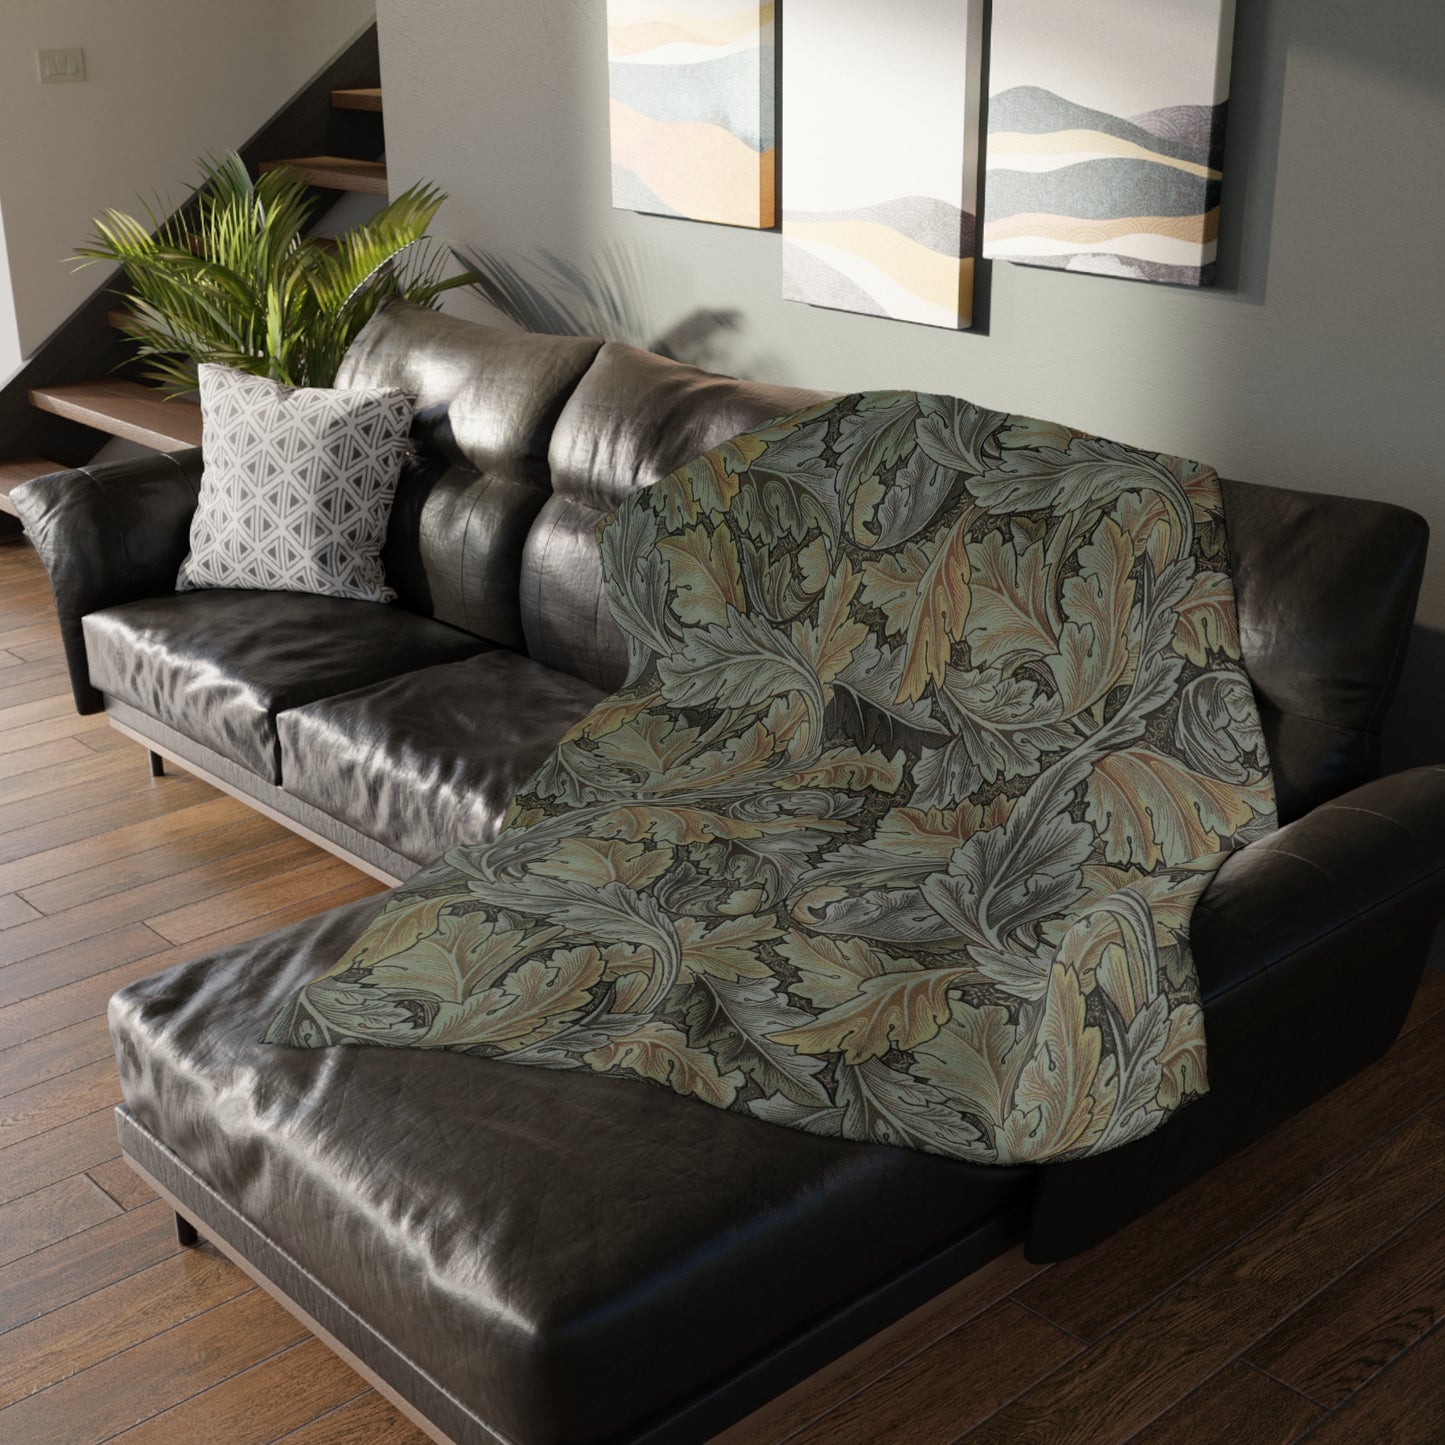 william-morris-co-luxury-velveteen-minky-blanket-two-sided-print-acanthus-collection-7